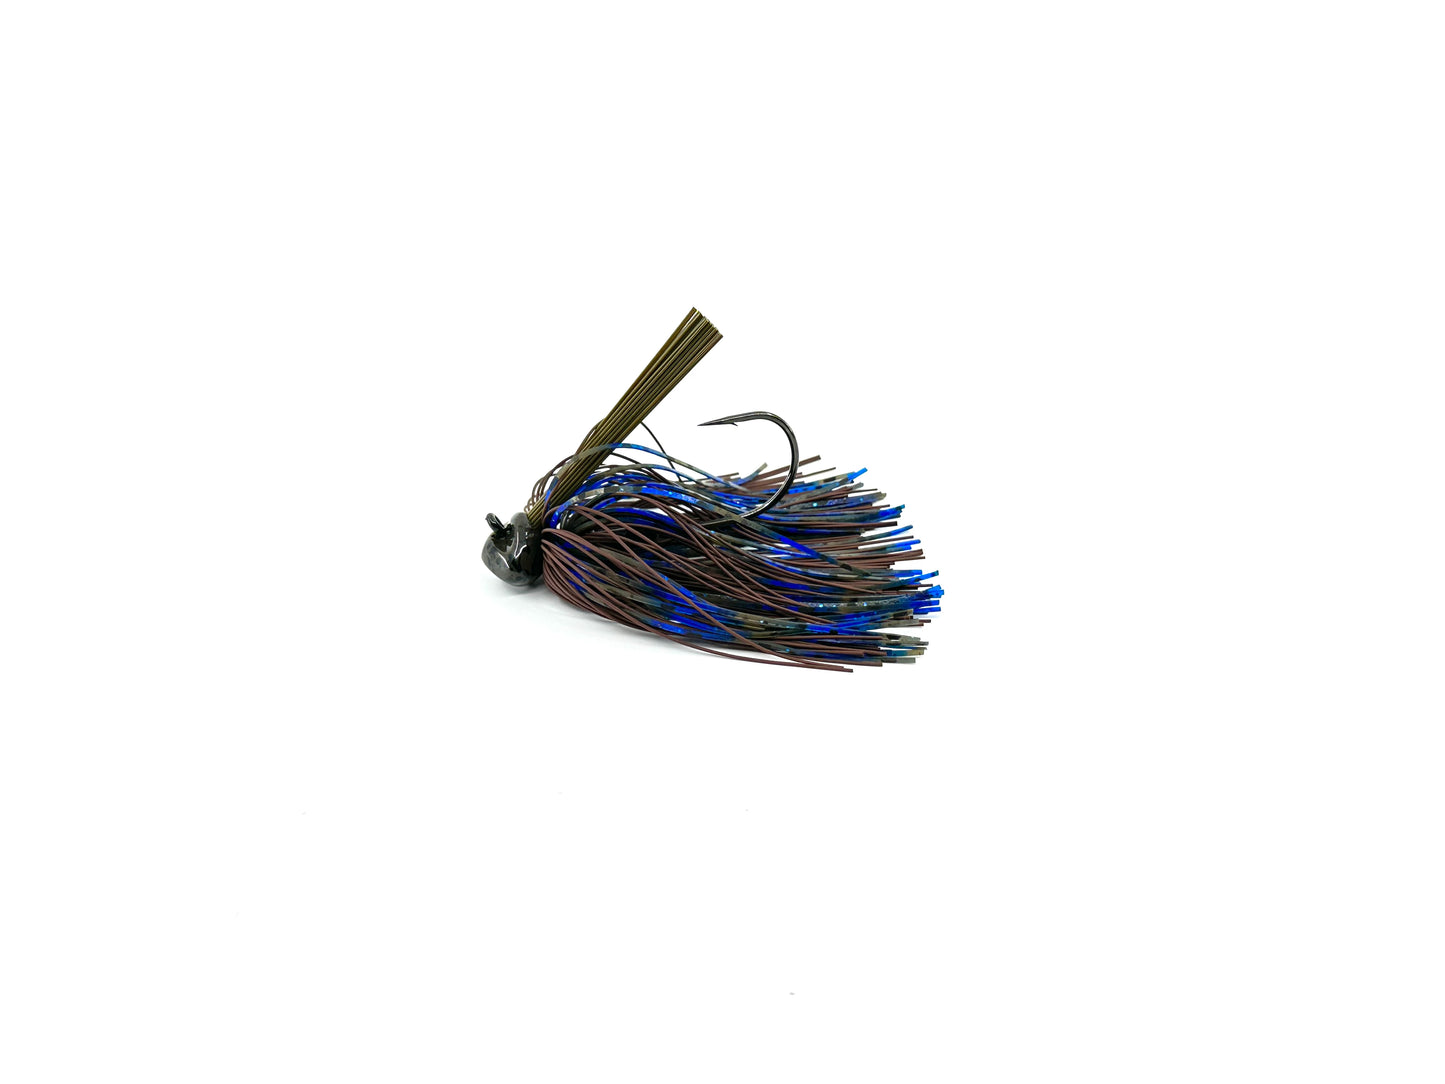 Mad Mouth Bass-Living Rubber Image Jig